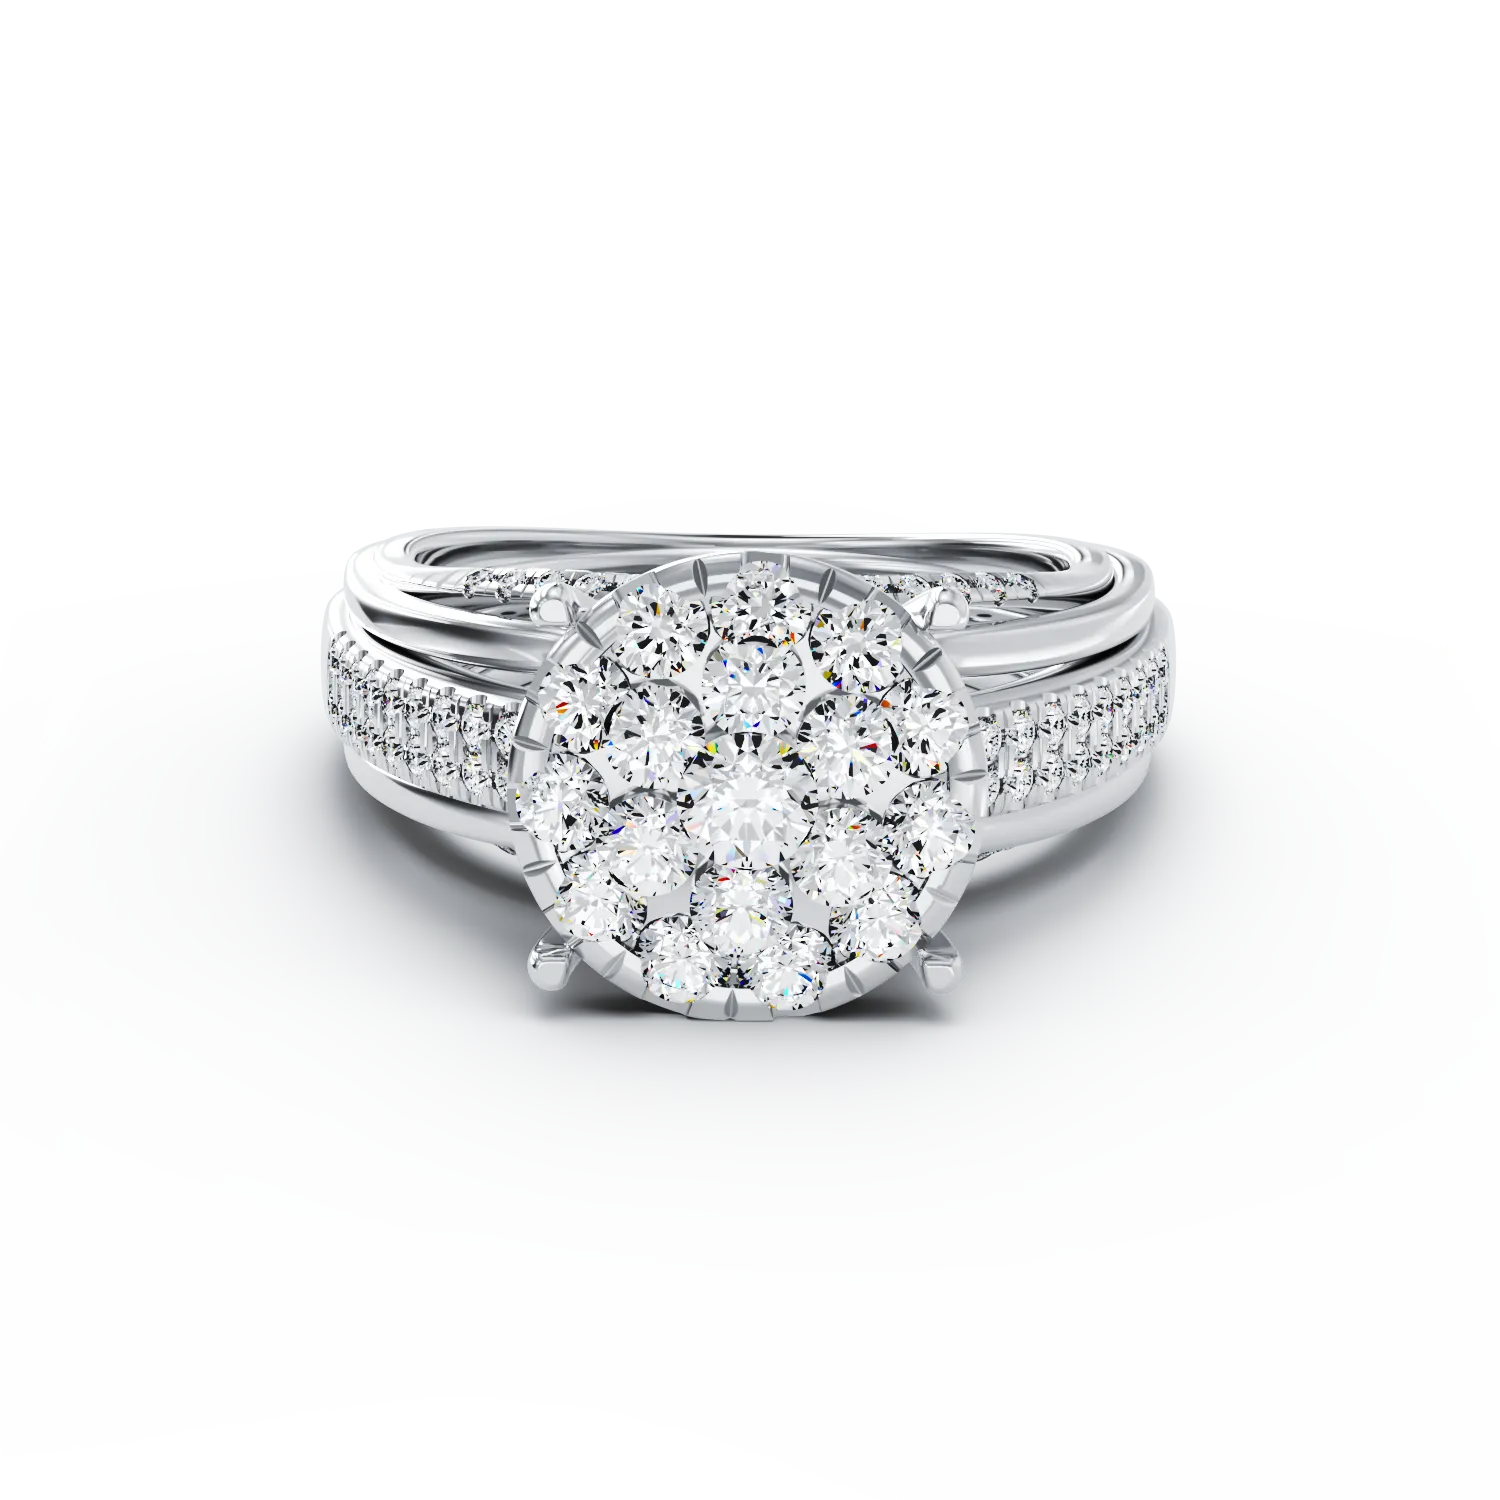 18K white gold engagement ring with diamonds of 0.91ct